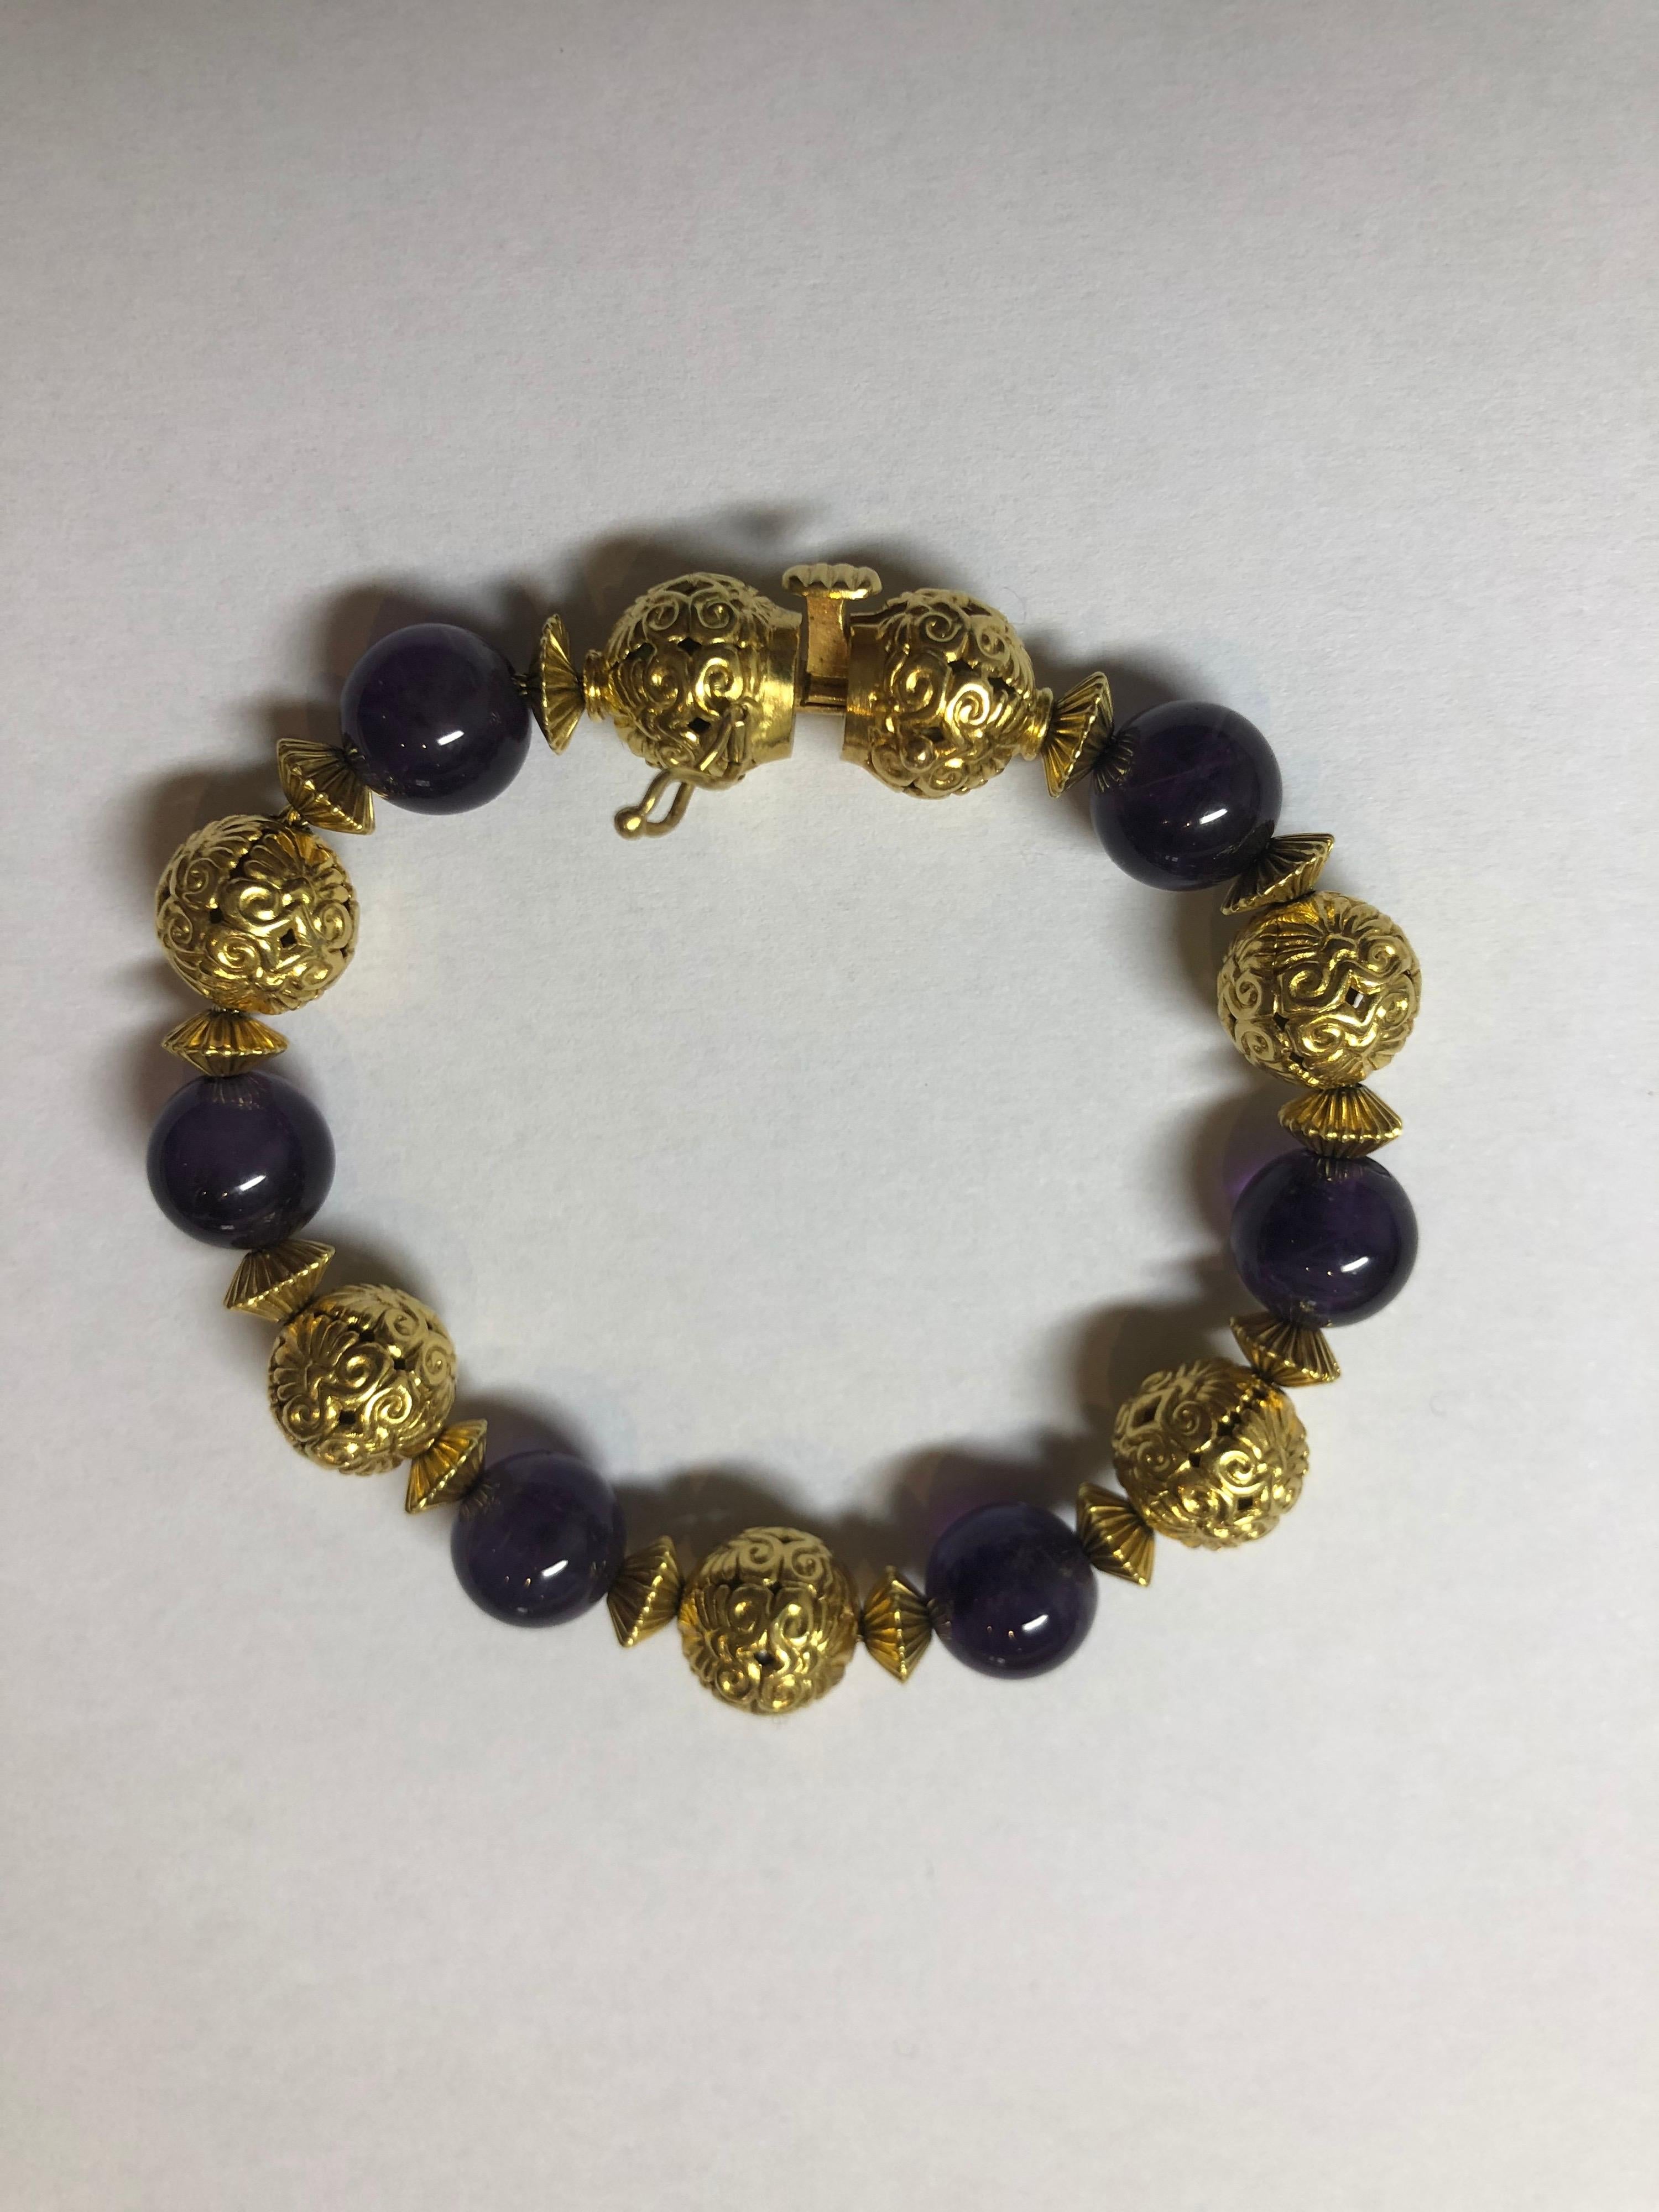 A very stylish amethyst and gold bracelet by renowned Greek designer Lalaounis. 